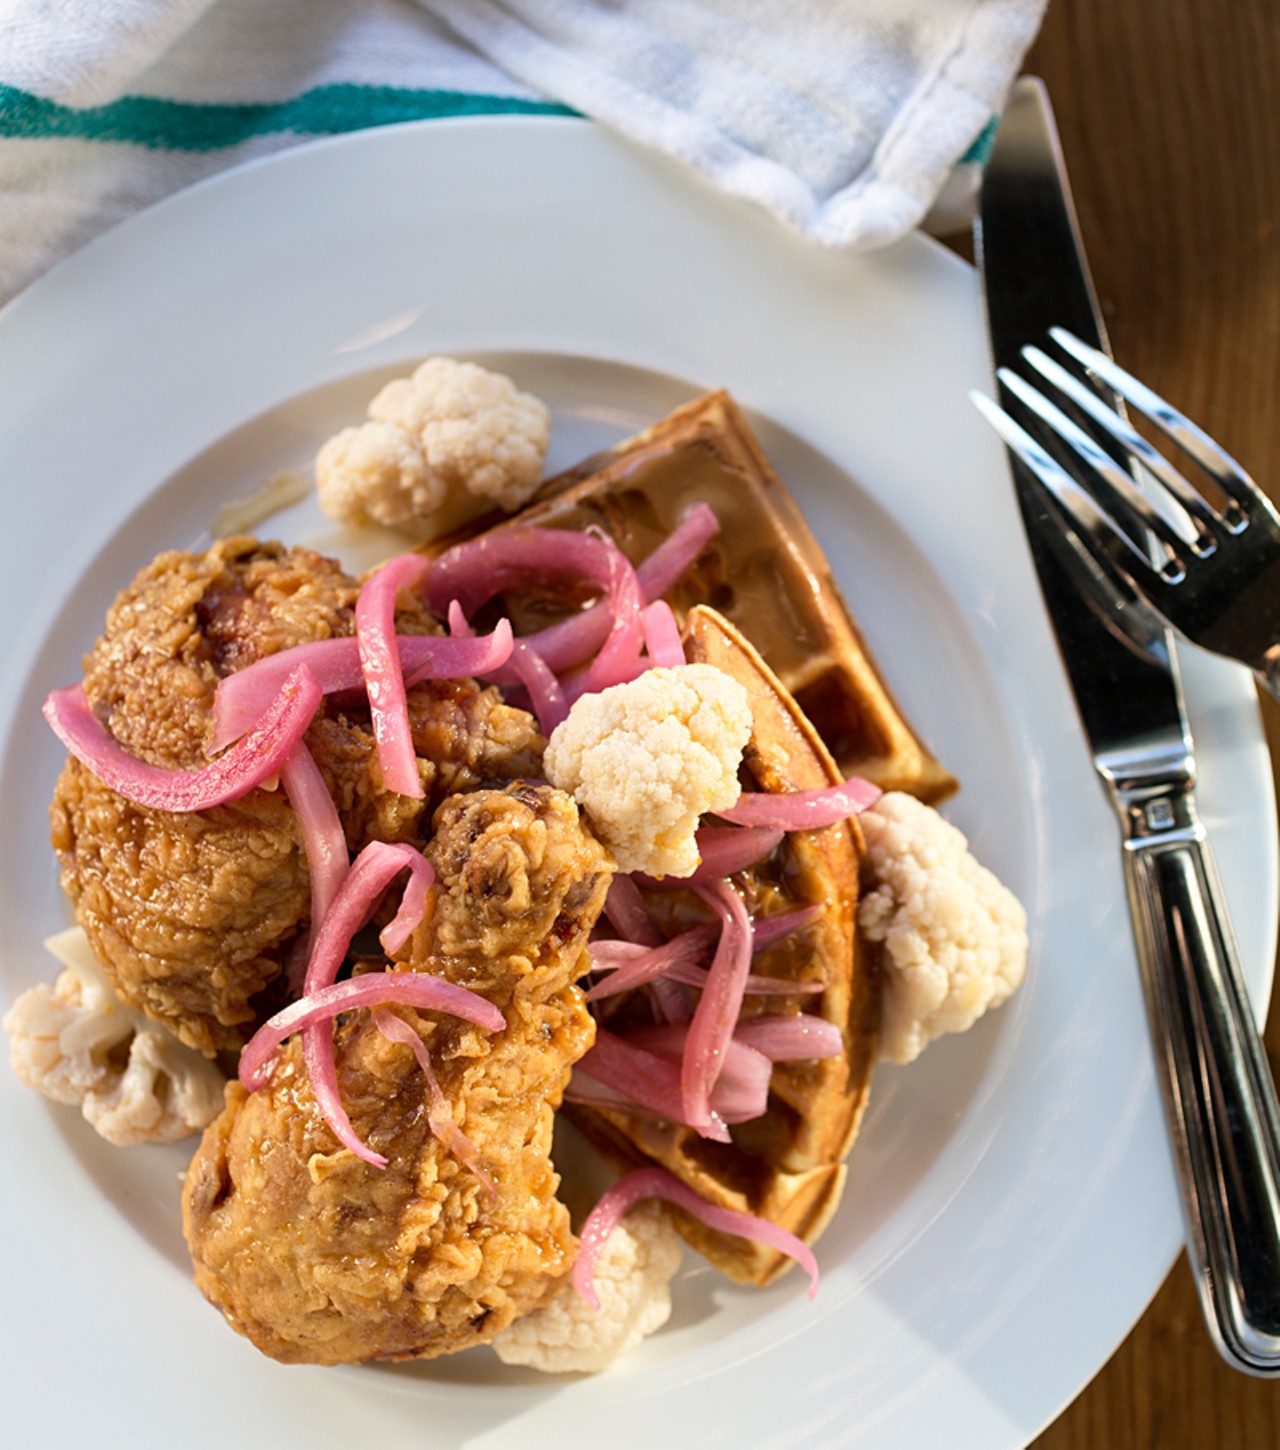 Juniper&rsquo;s chicken & waffles come with pickles, syrup and peanut butter.